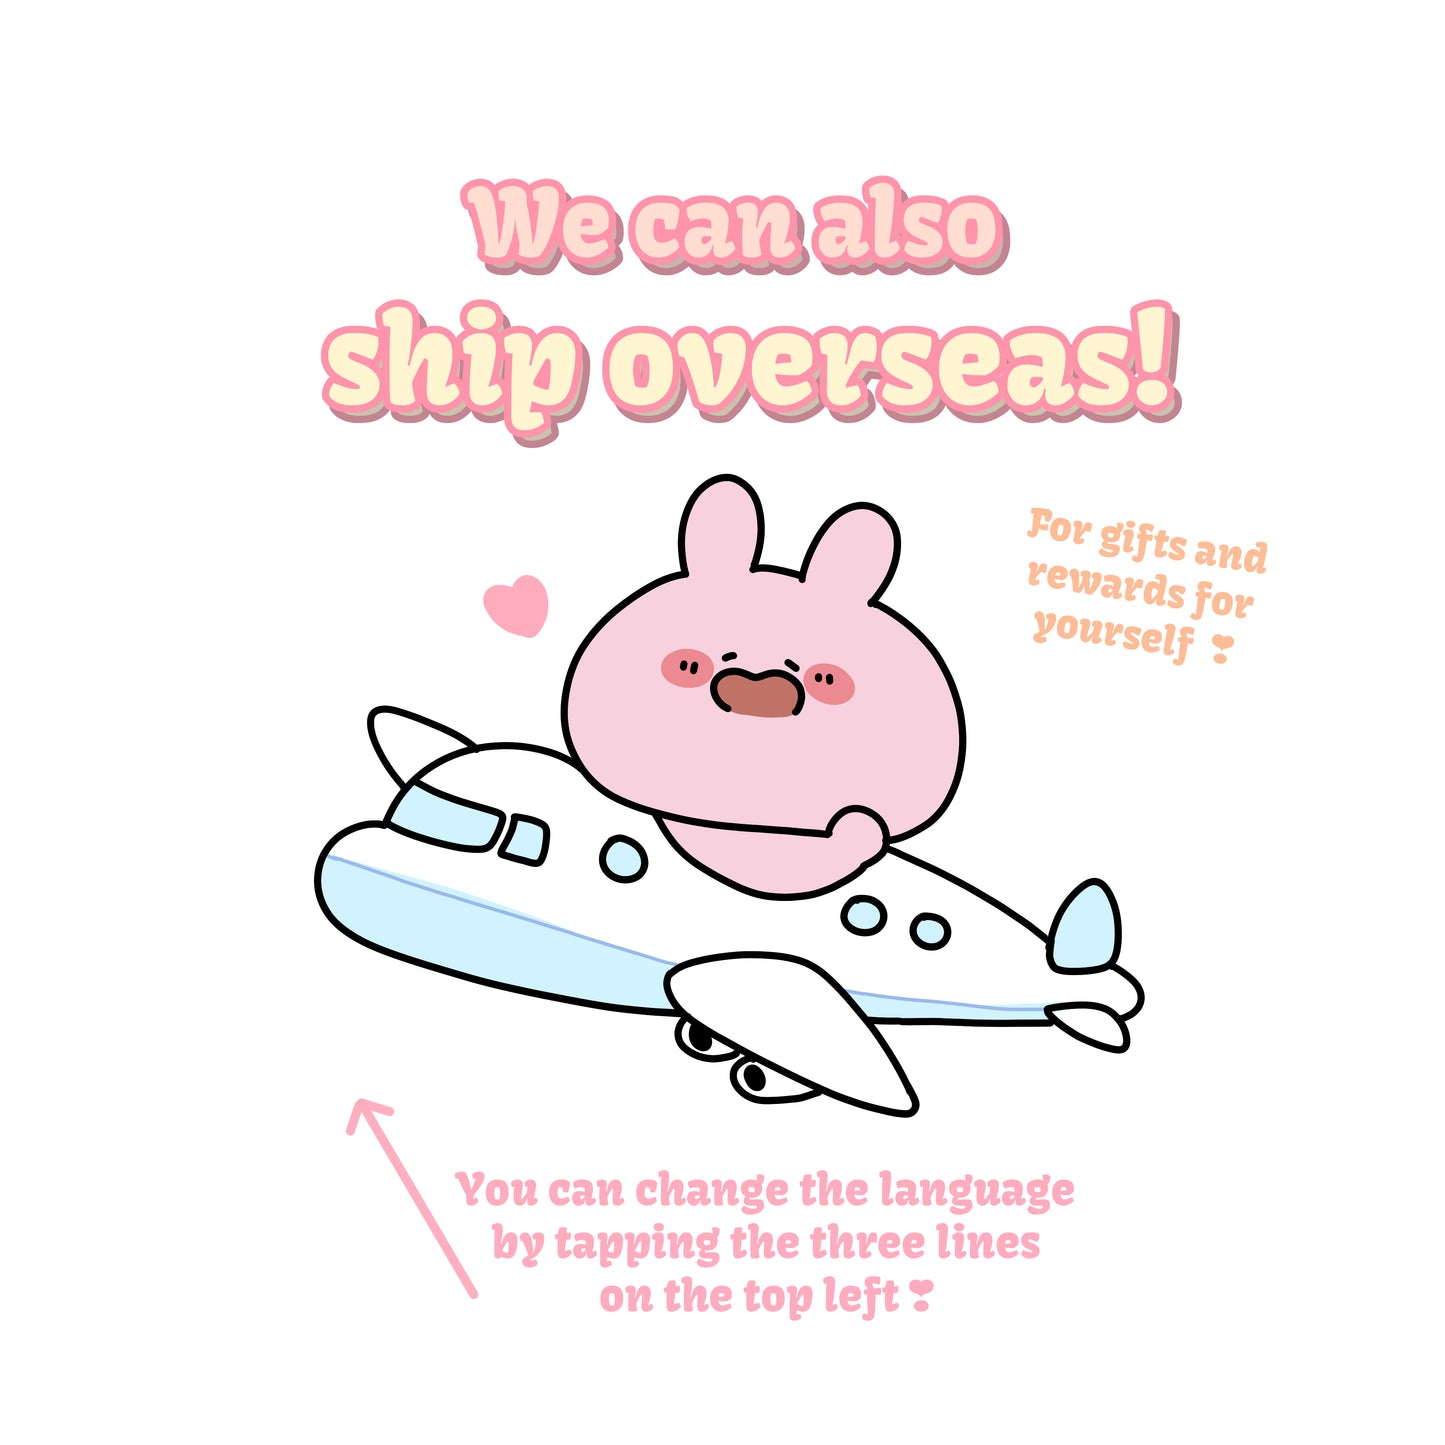 [Asamimi-chan] Pop-out ❣ die-cut sticker (Asamimi-chan popular scene Yoseatsume series) [Shipped in mid-February]